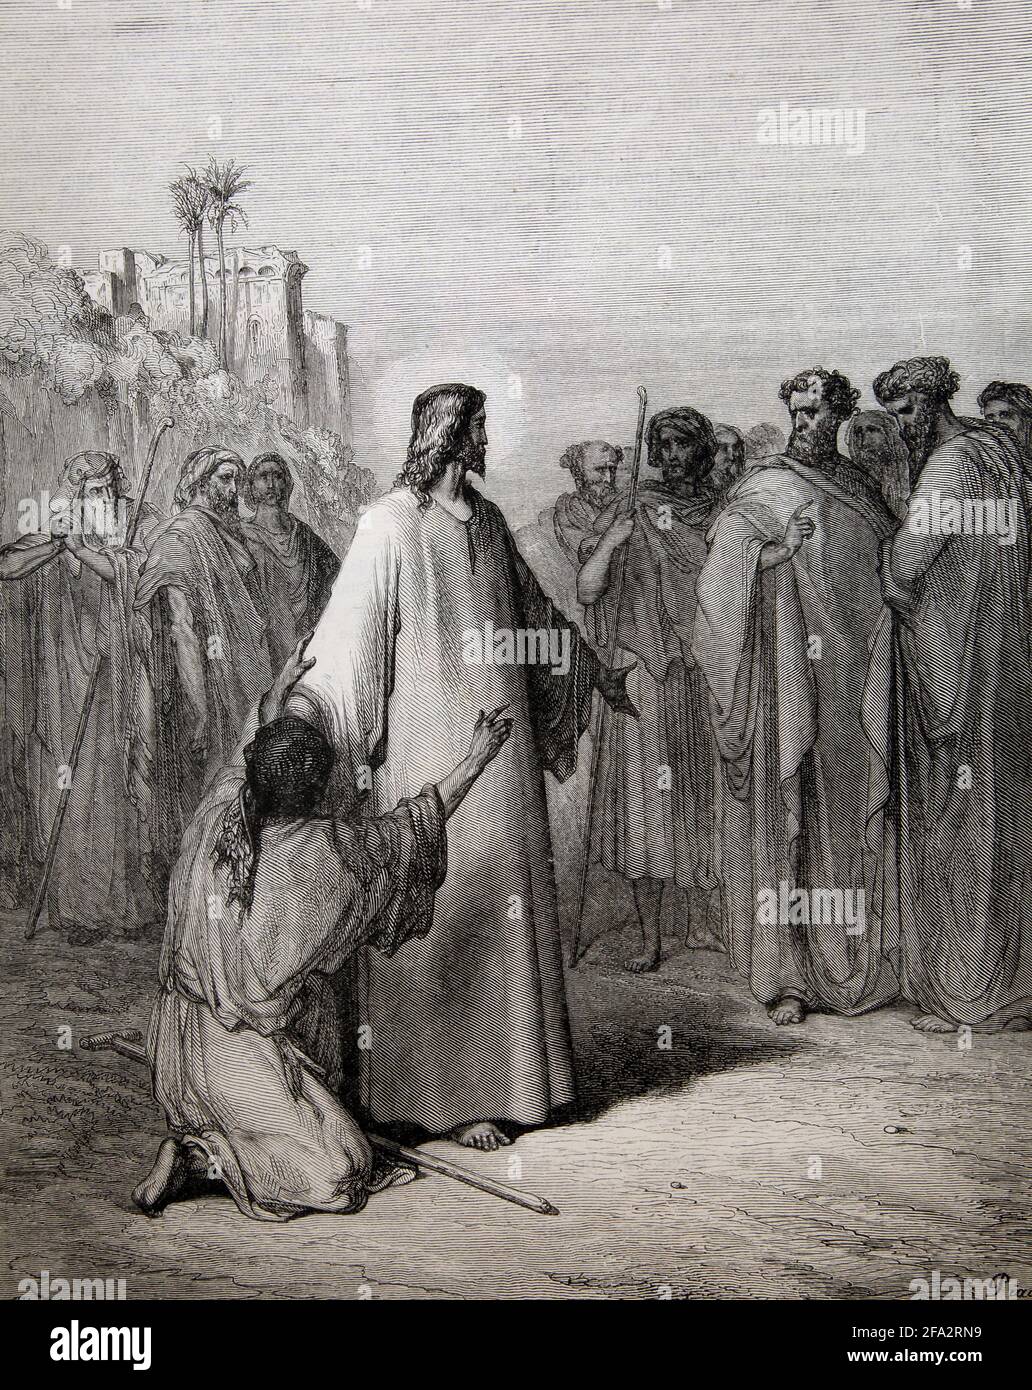 Bible Story Illustration Jesus Healing the man Possessed with th Devil (Luke 4:36-37) by gustave Dore Stock Photo